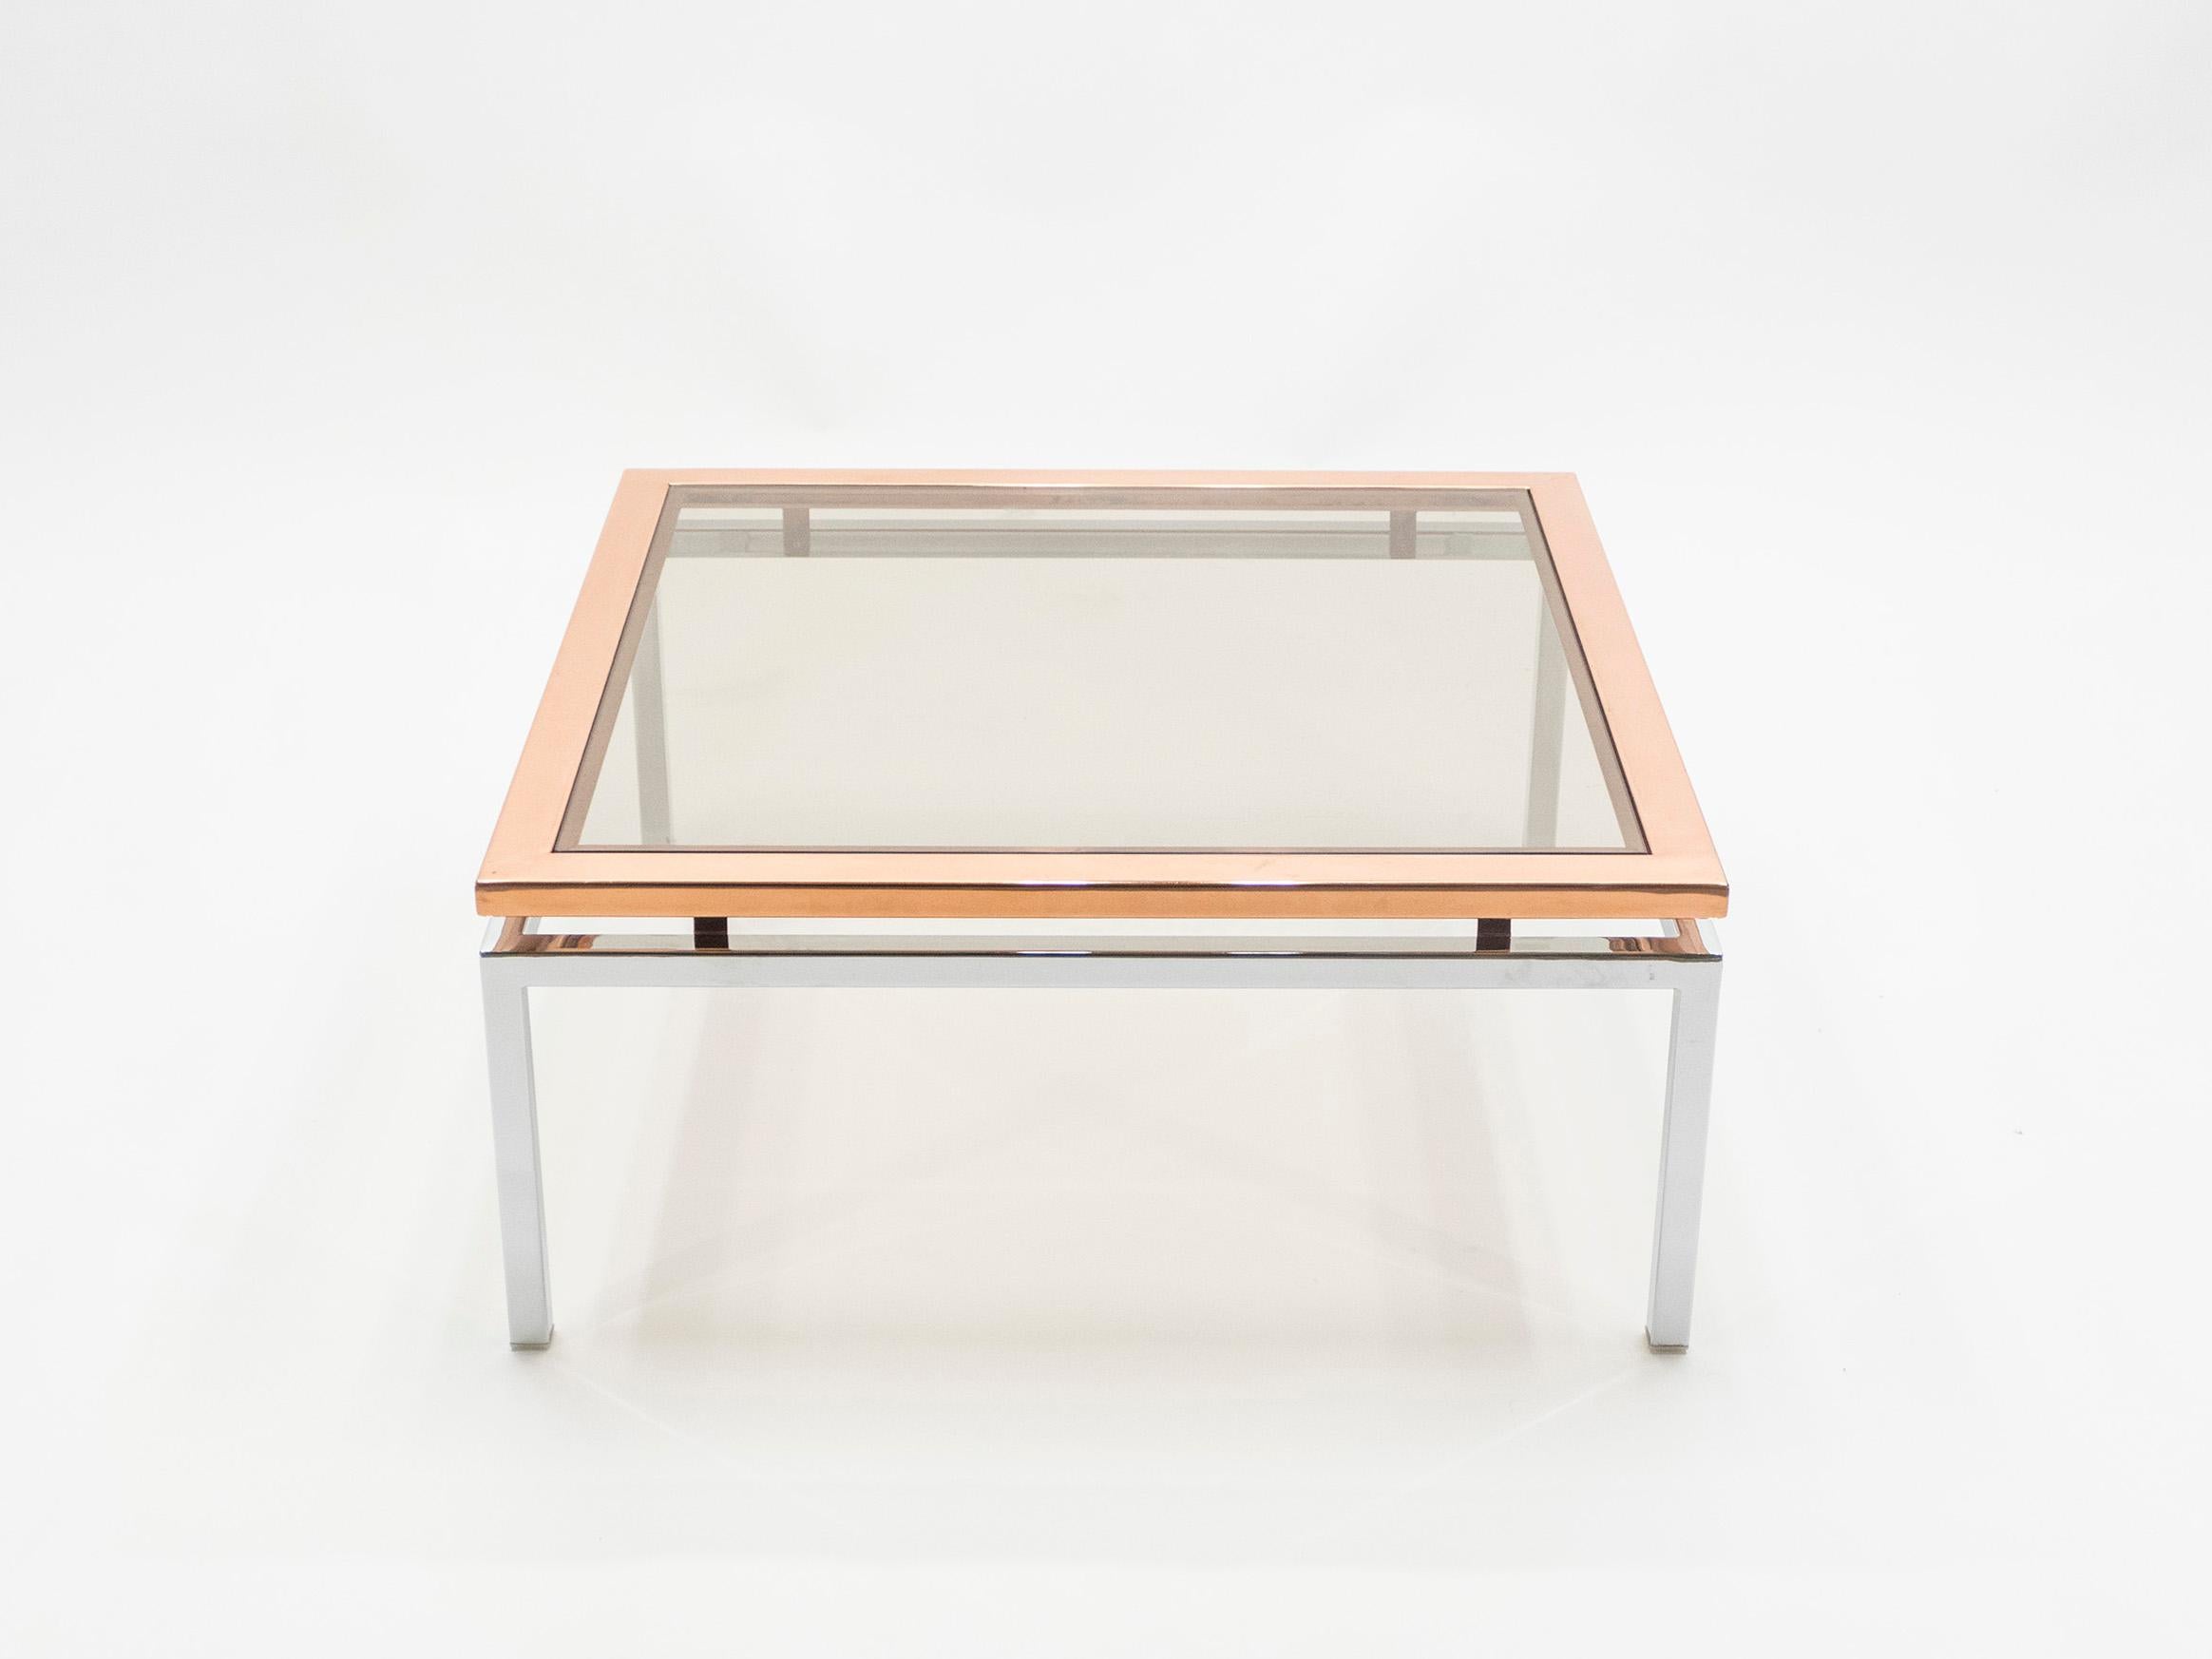 French Pair of Square Chrome Copper Coffee Tables Guy Lefevre for Maison Jansen, 1970s